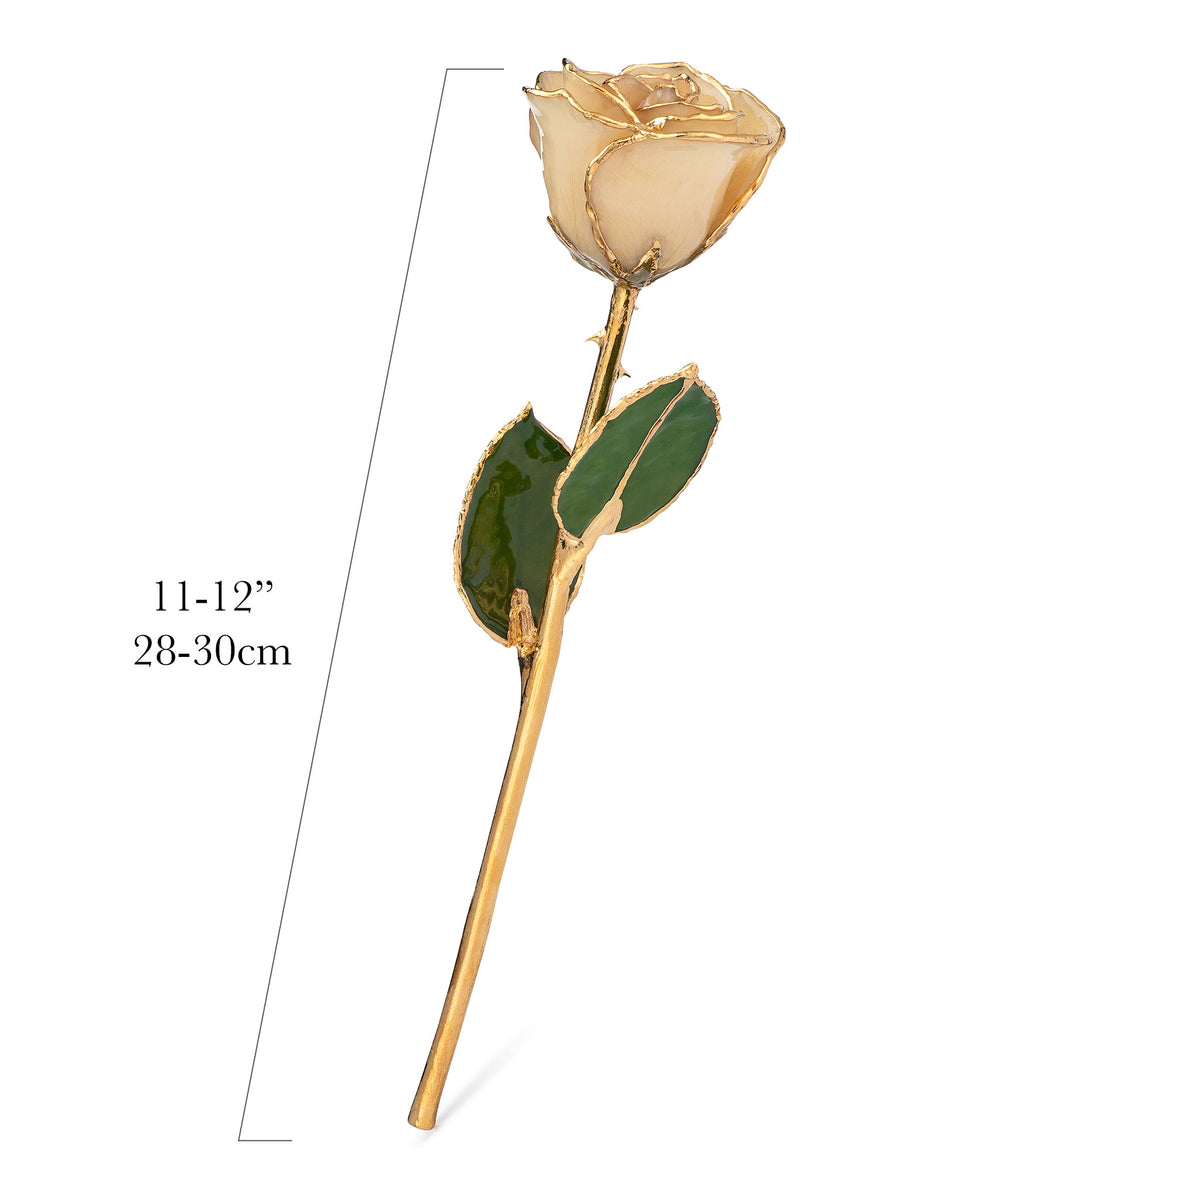 24K Gold Trimmed Forever Rose with White Petals. View of Stem, Leaves, and Rose Petals and Showing Detail of Gold Trim with measurements of the rose